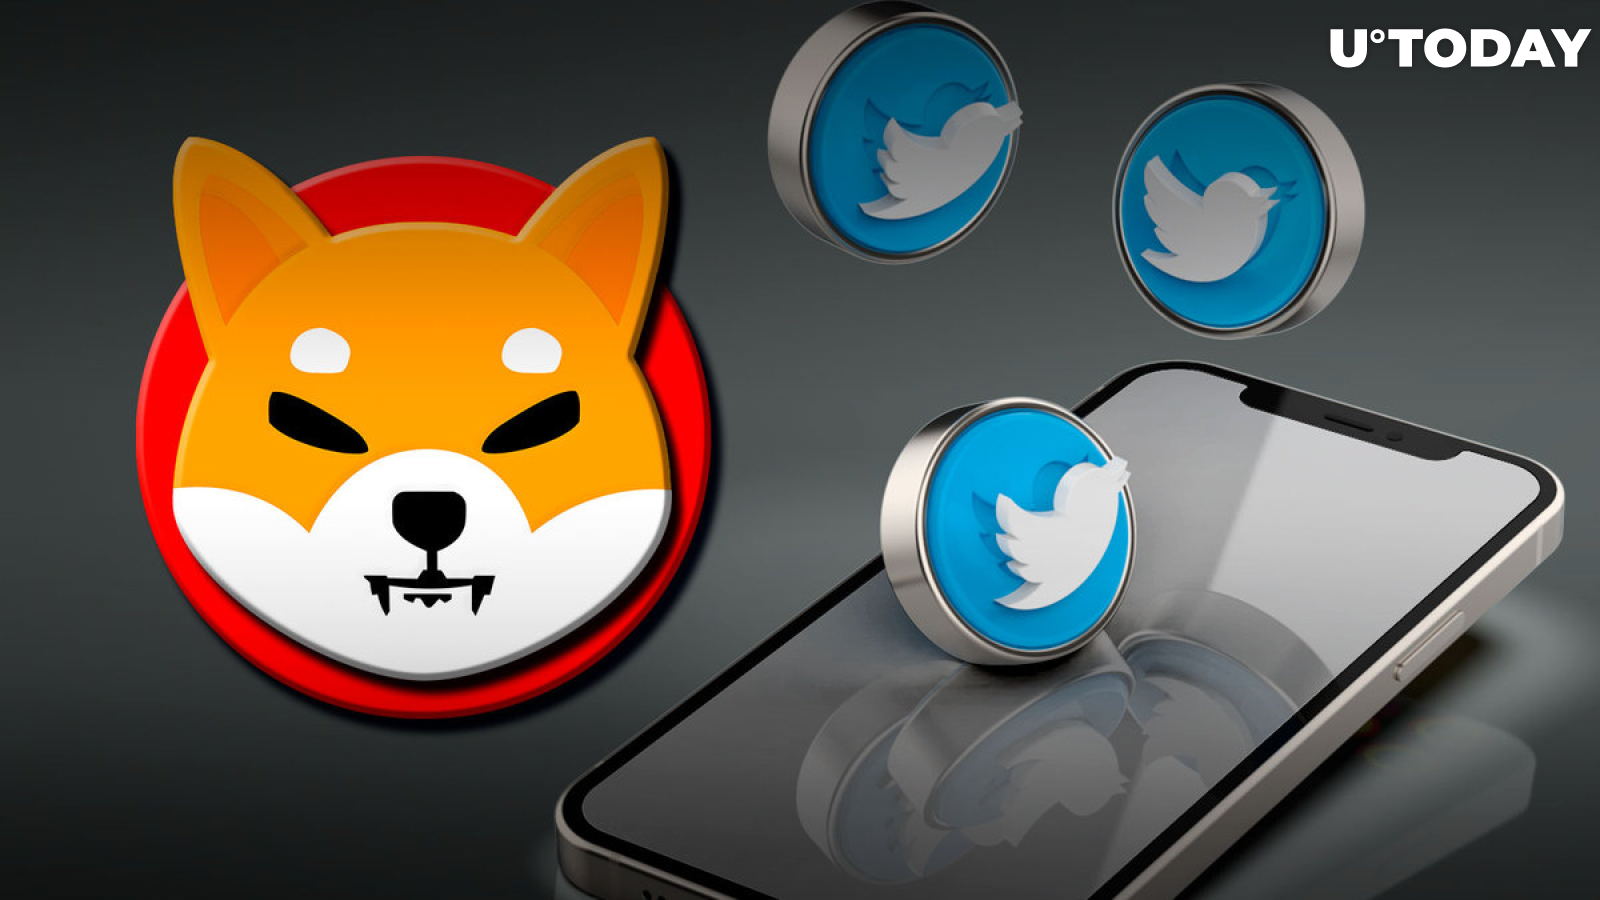 Shiba Inu Shares Mysterious Tweet, Here's What Community Made of It: Details